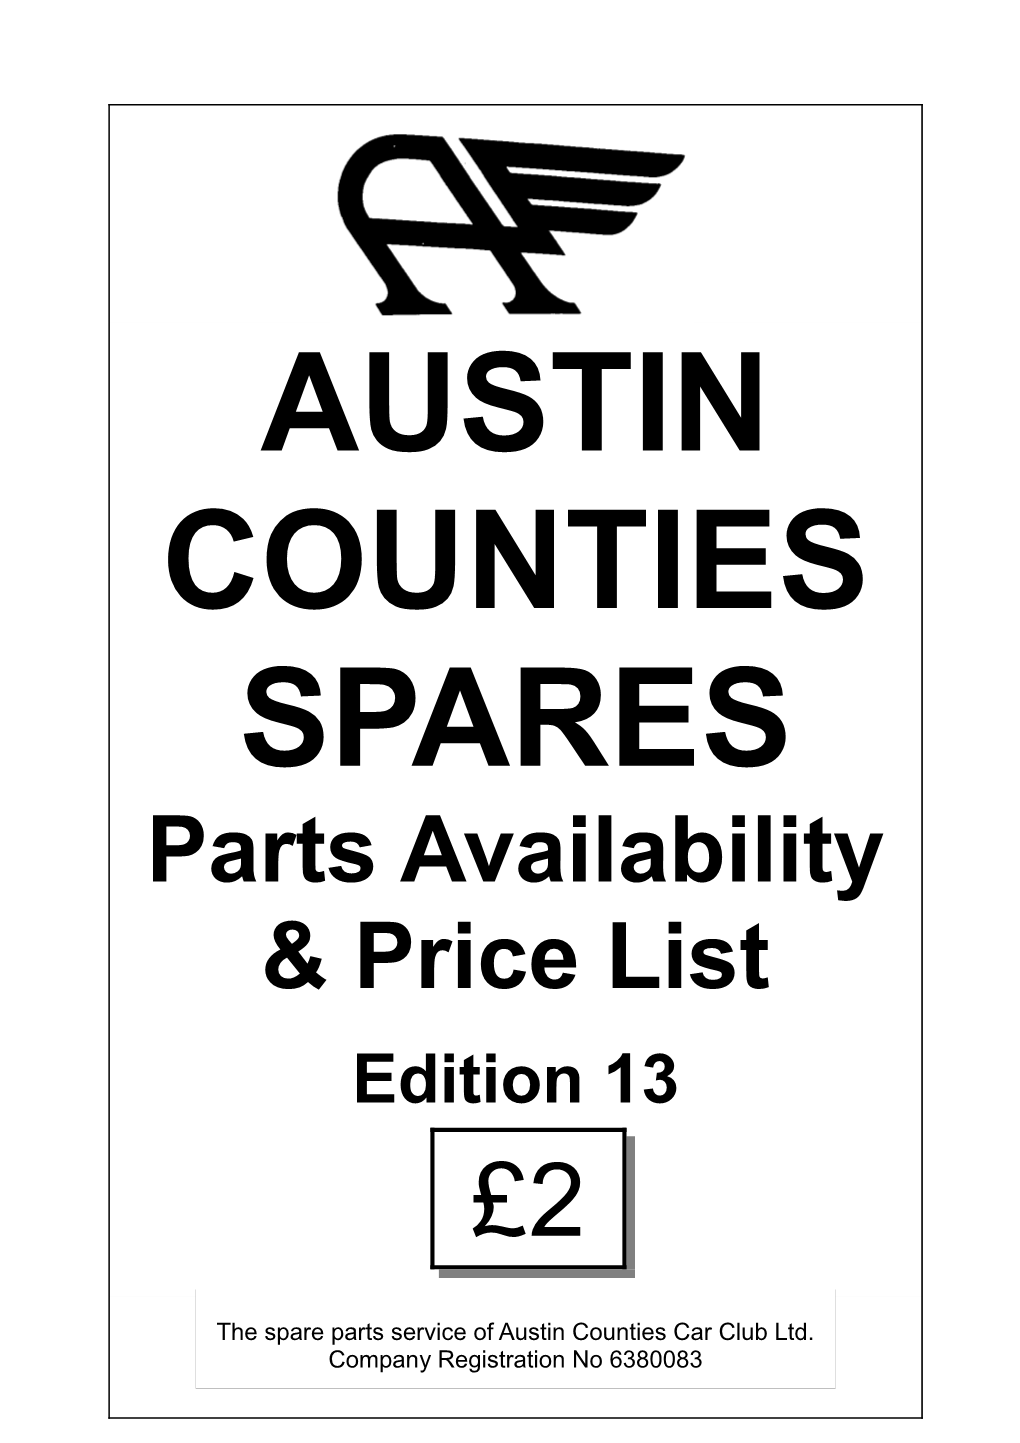 Parts Availability & Price List